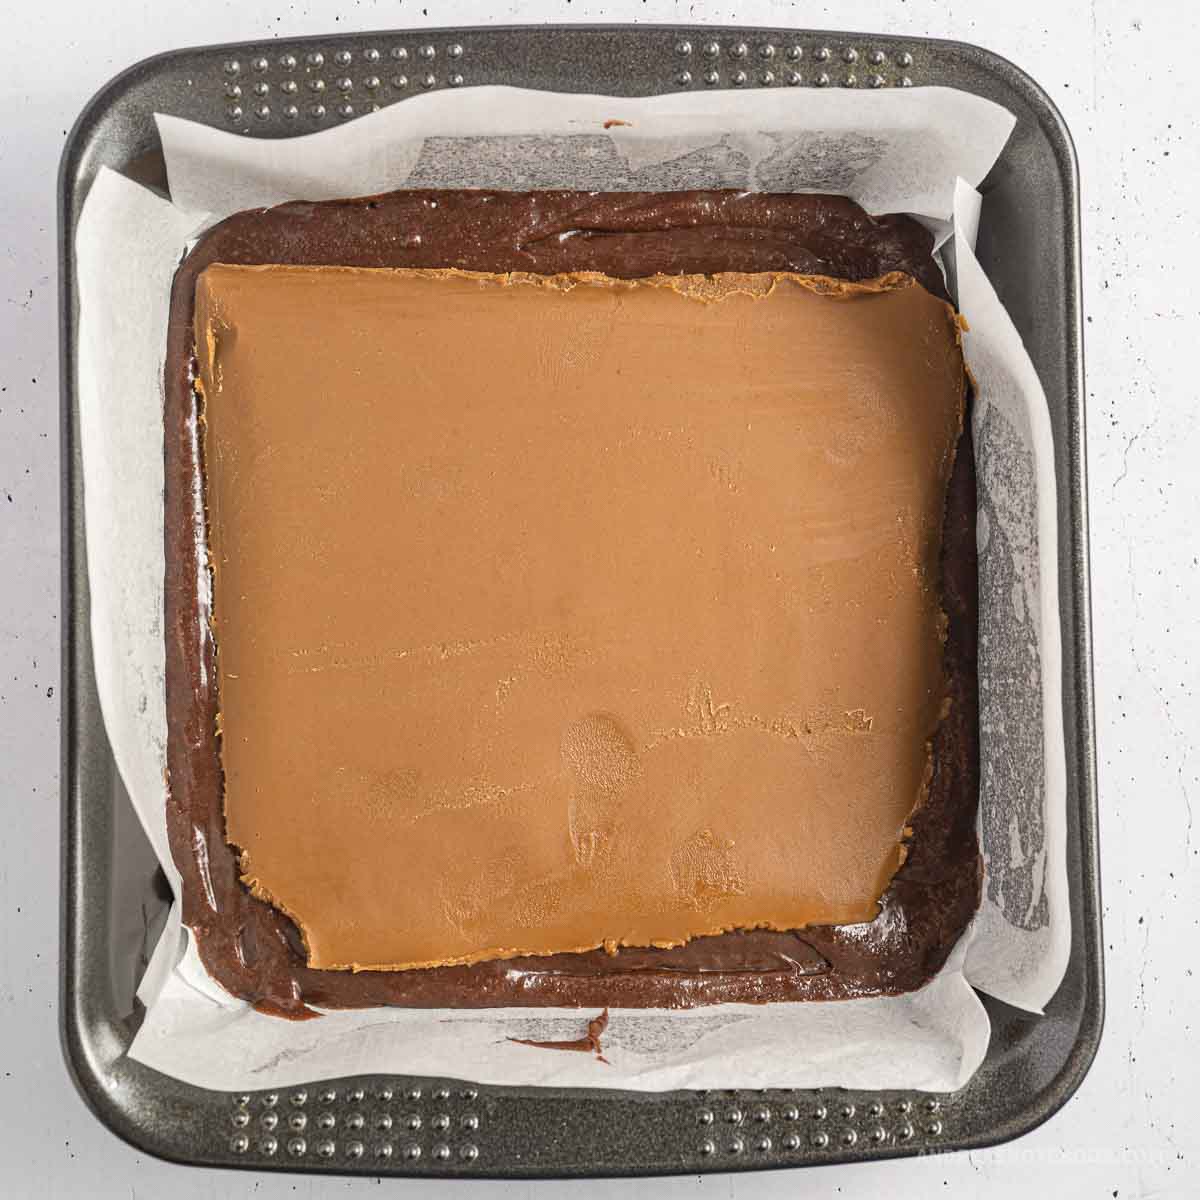 Brownie batter poured into pan with biscoff butter on top.